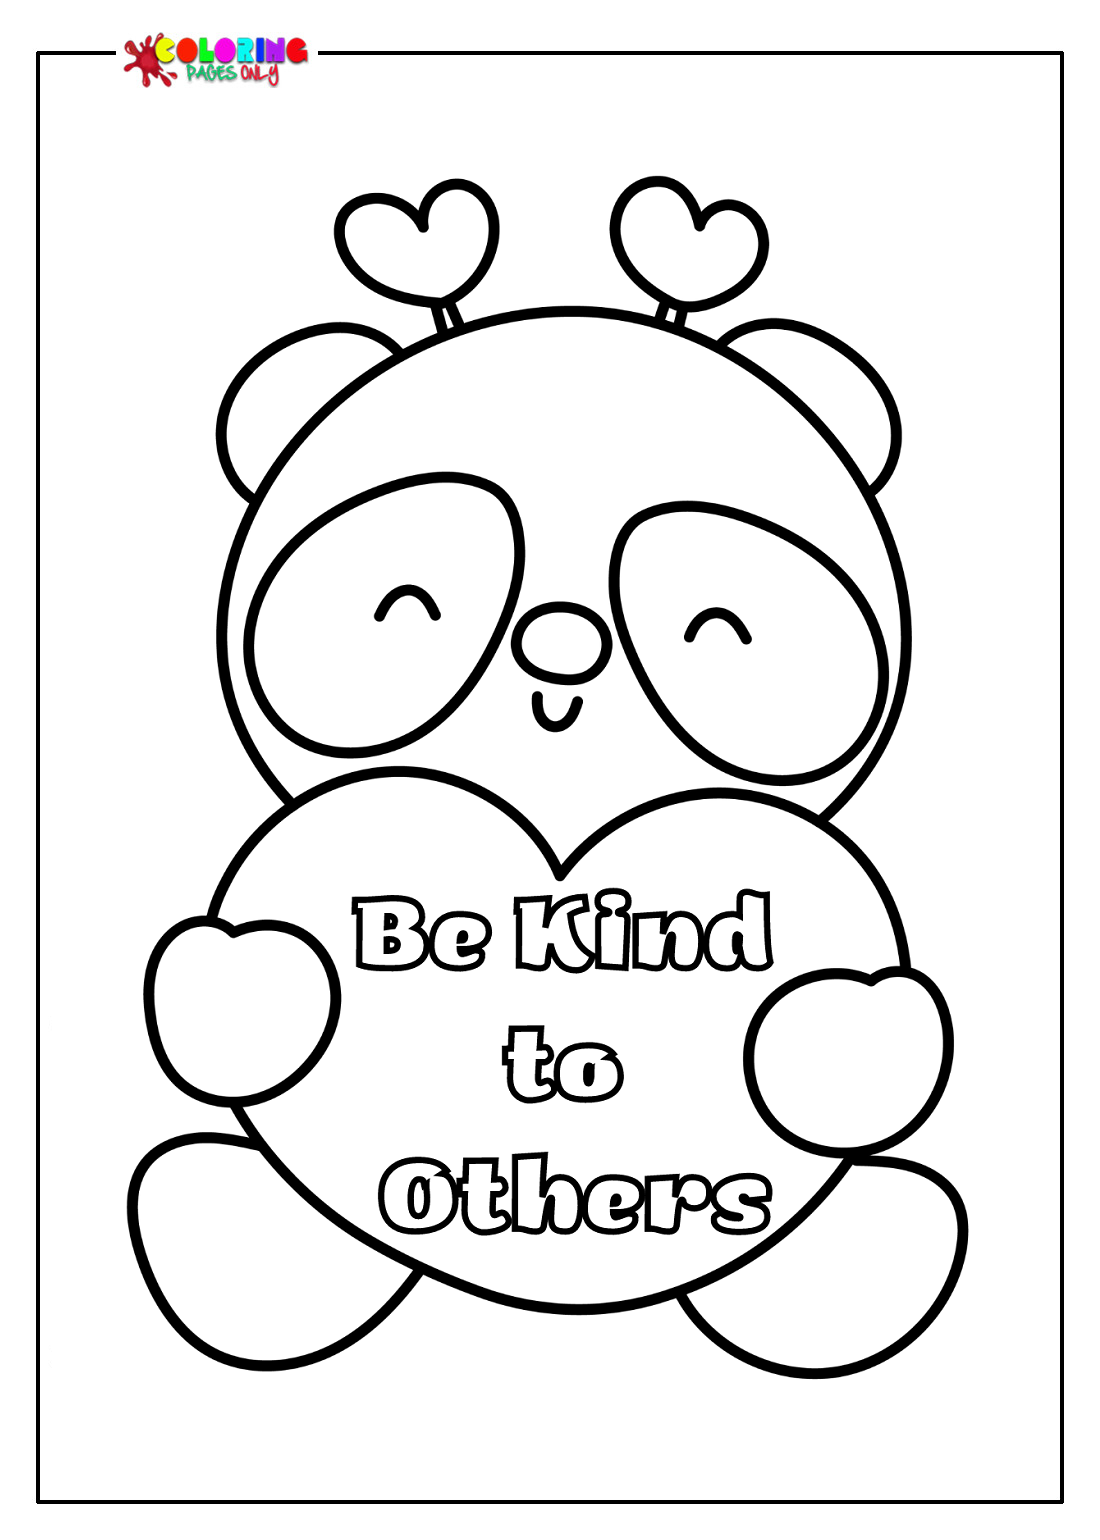 Be Kind to Others Coloring Page